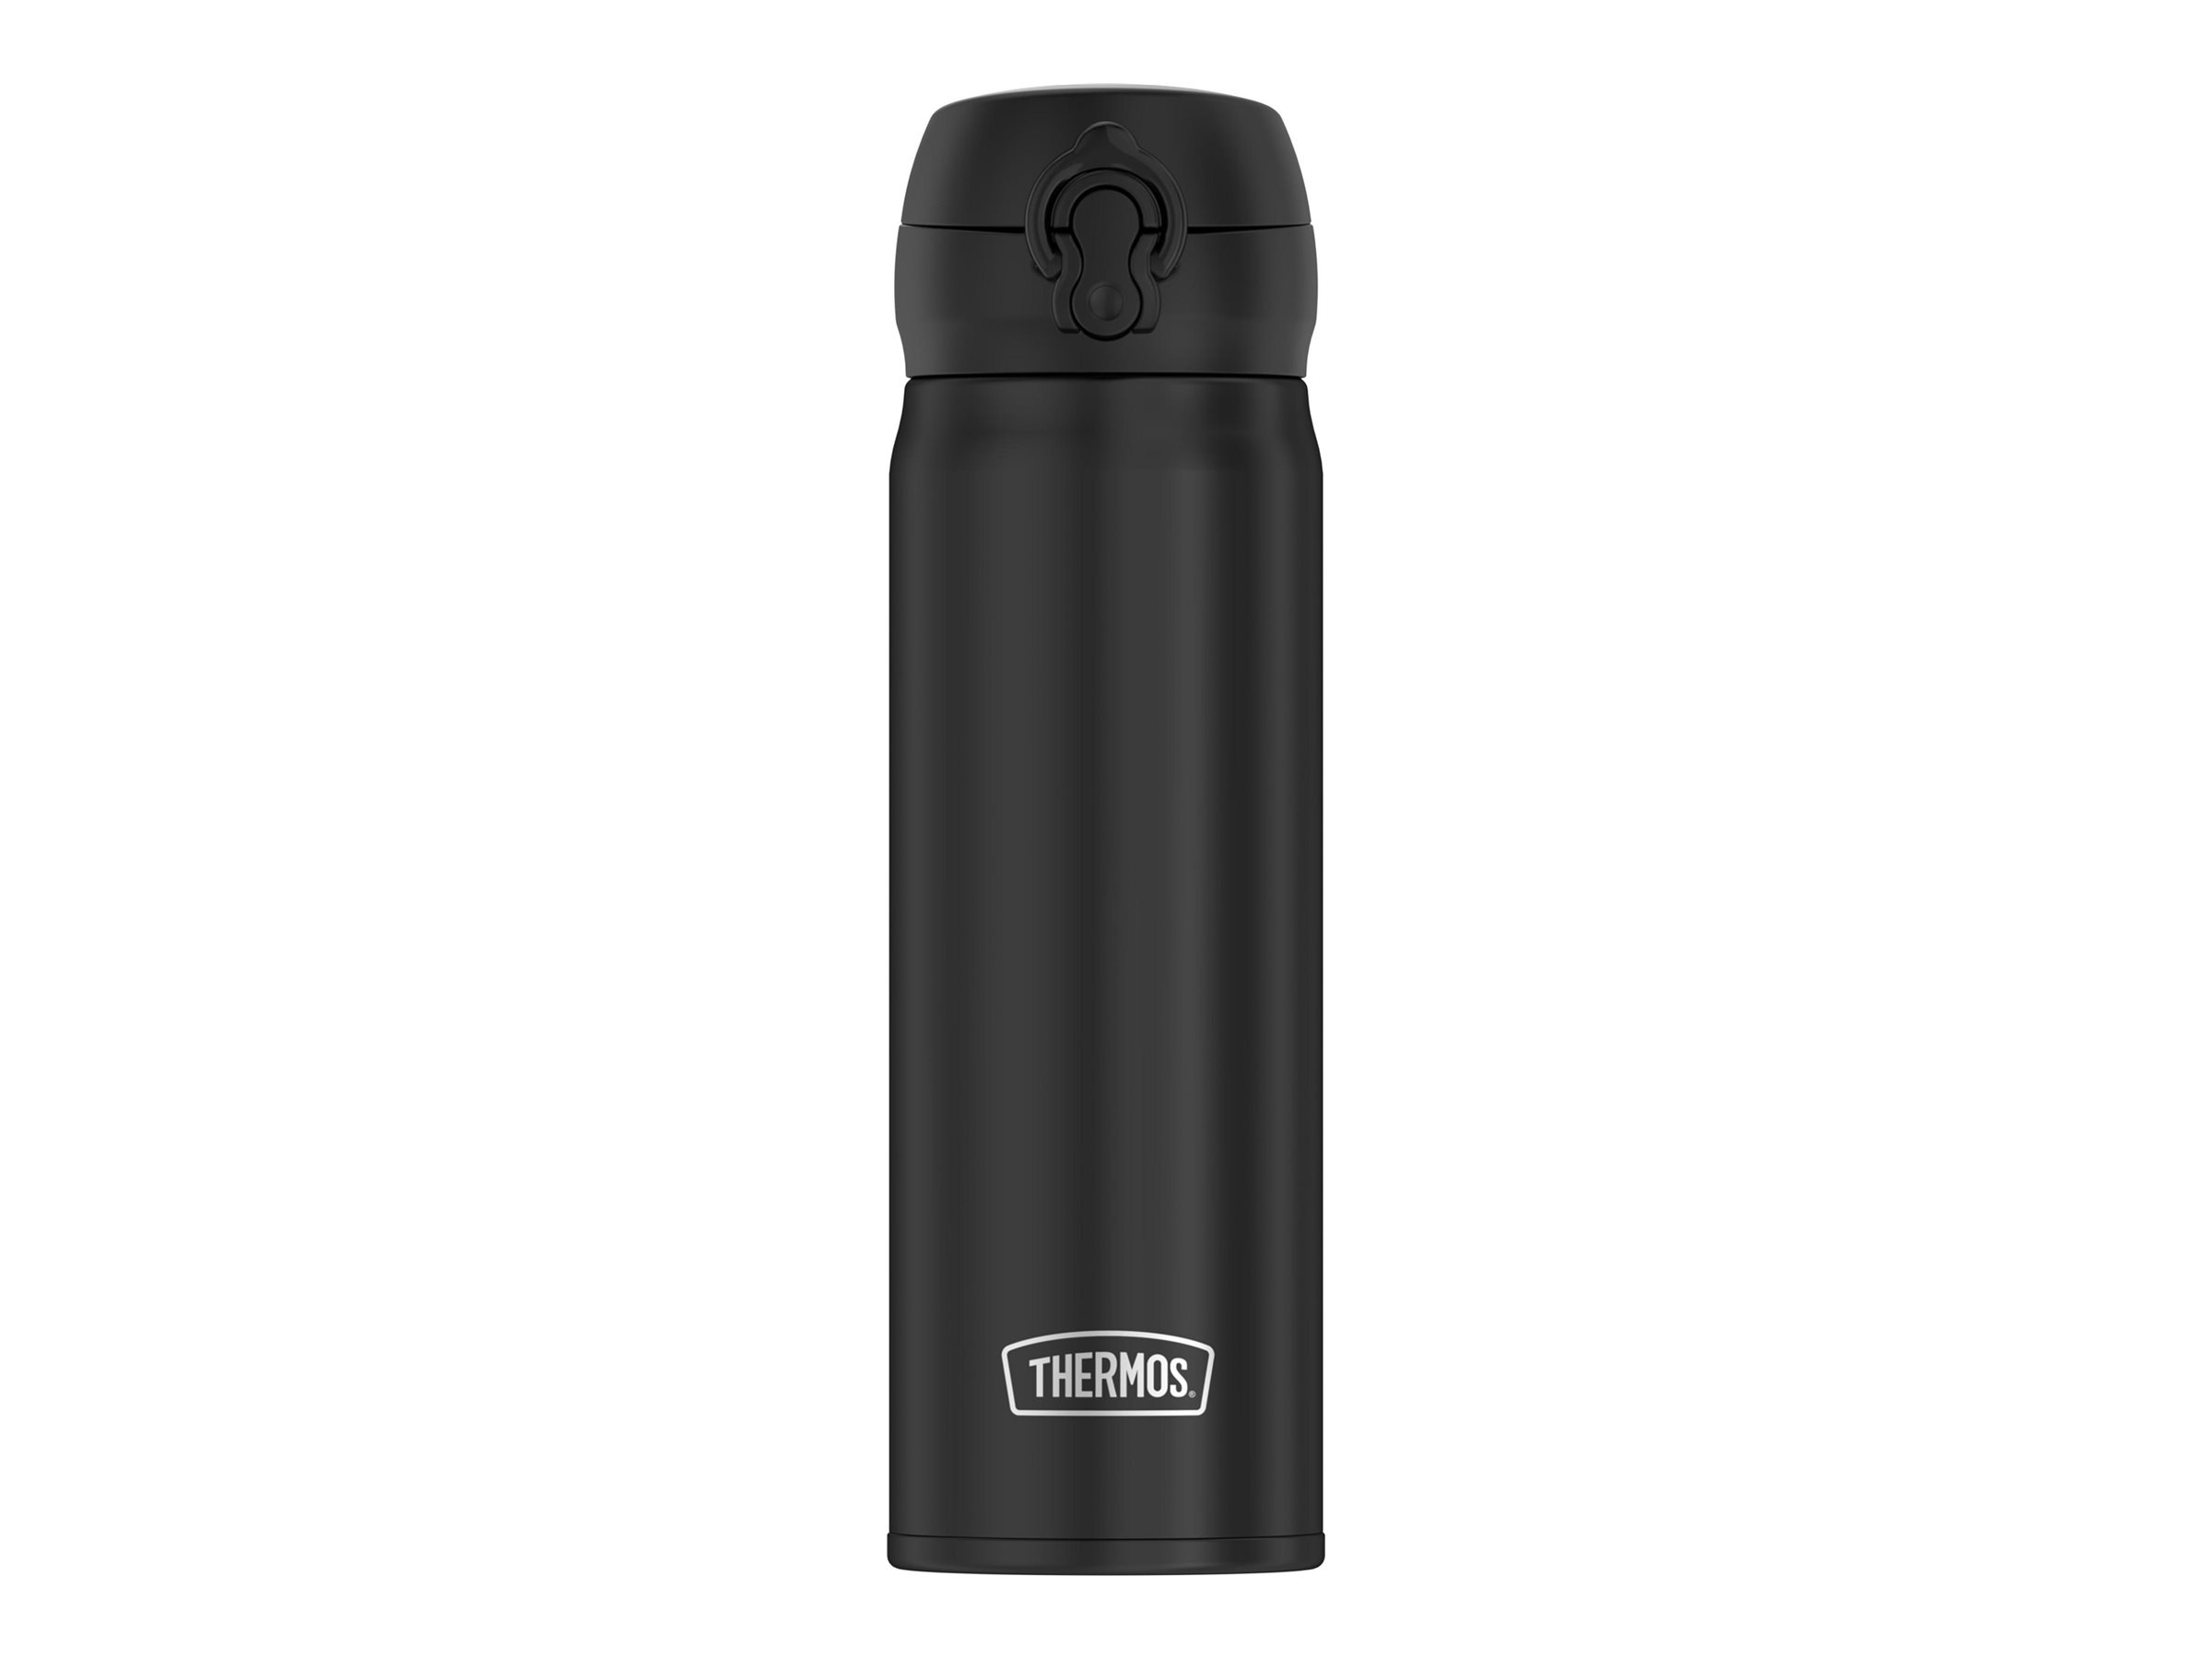 Thermos Stainless Steel Direct Drink Bottle - Matte Black - 470ml